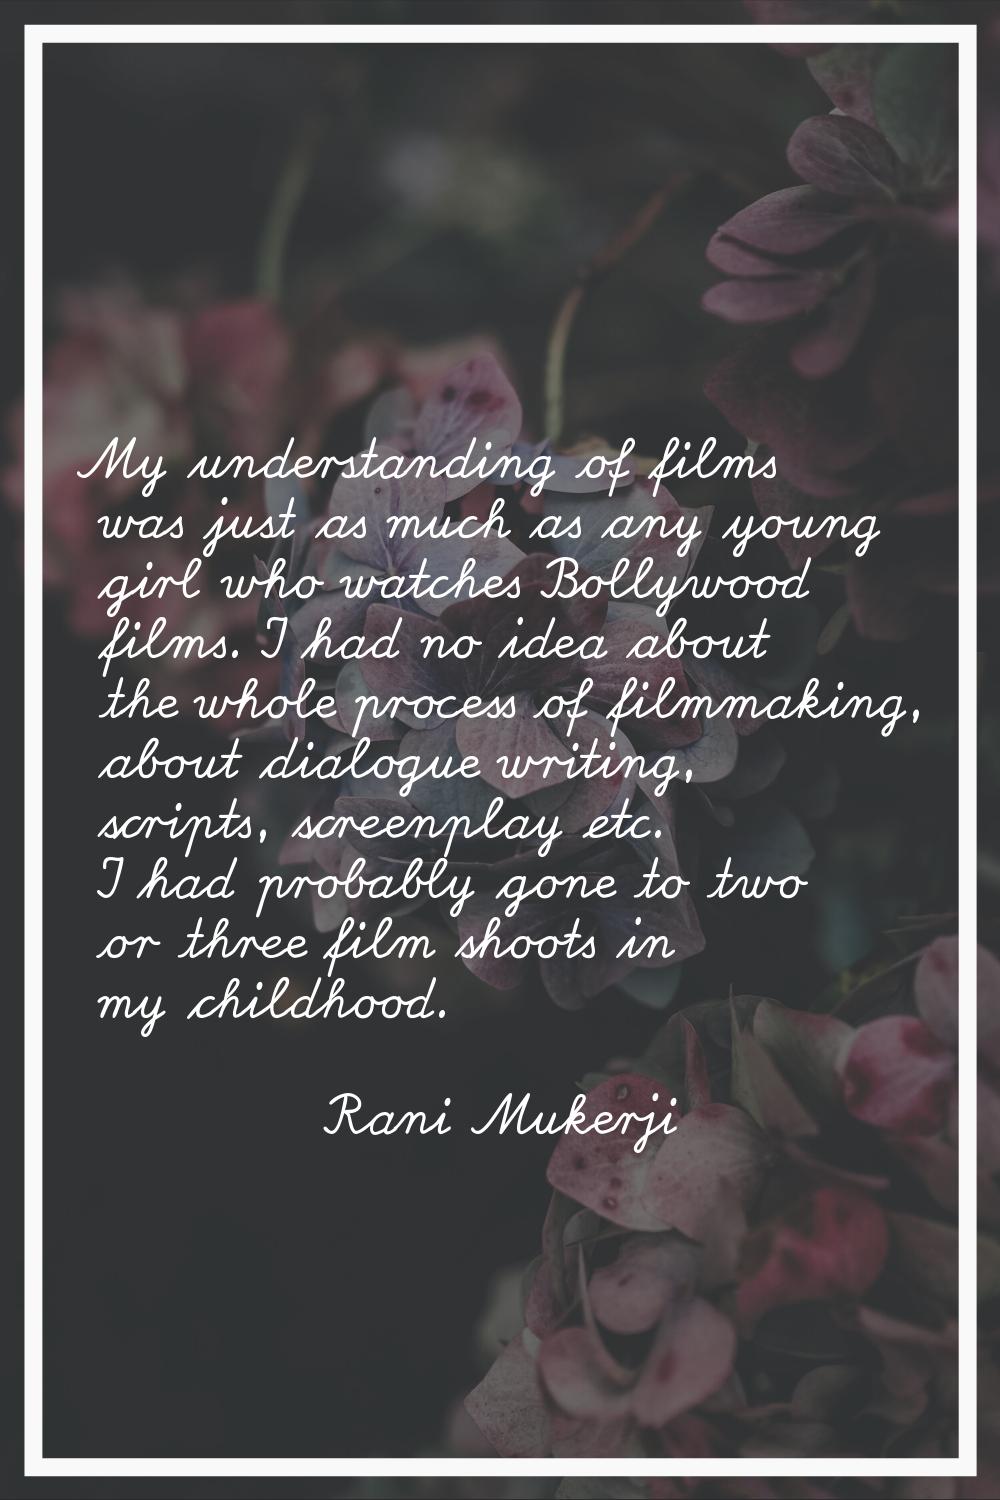 My understanding of films was just as much as any young girl who watches Bollywood films. I had no 